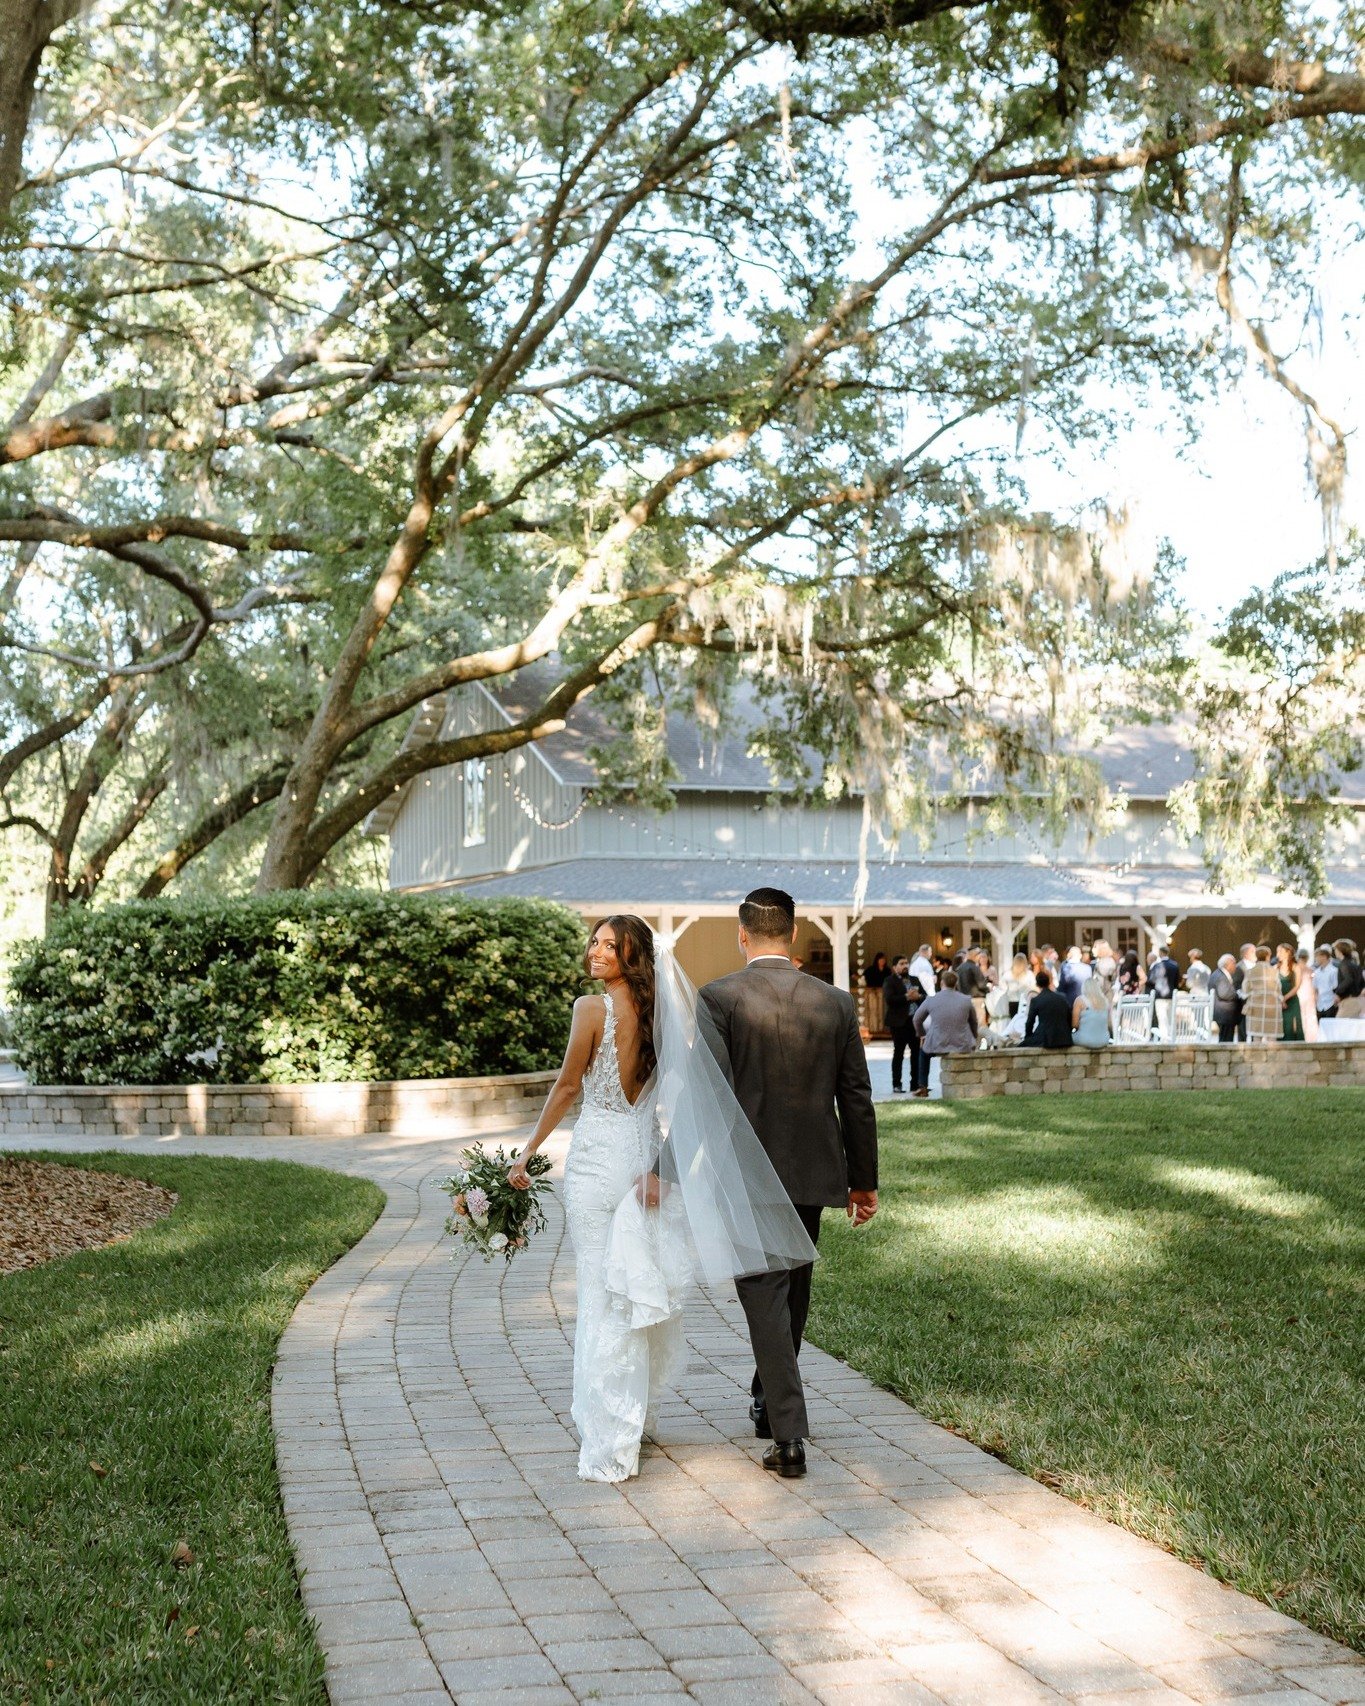 &quot;Let's get this party started!&quot; 

The ceremony is over, the photos are finished, and it's time to join your friends and family for an amazing celebration of your marriage!

planner: @monicabevents
venue: @bowingoaks
photo: @erinshelbyphotog